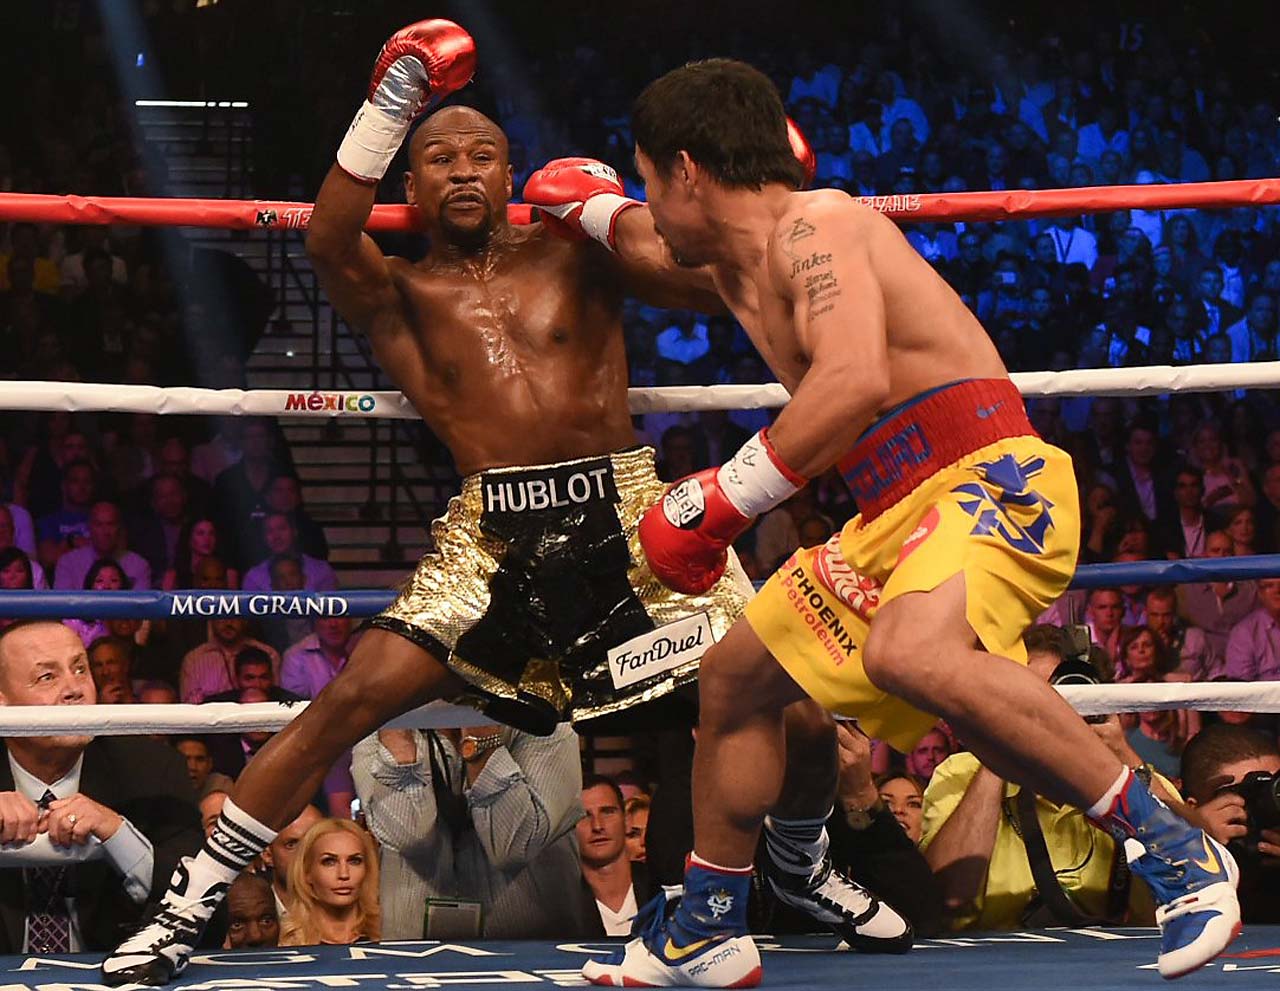 Mayweather beats Pacquiao but loses in eye of public